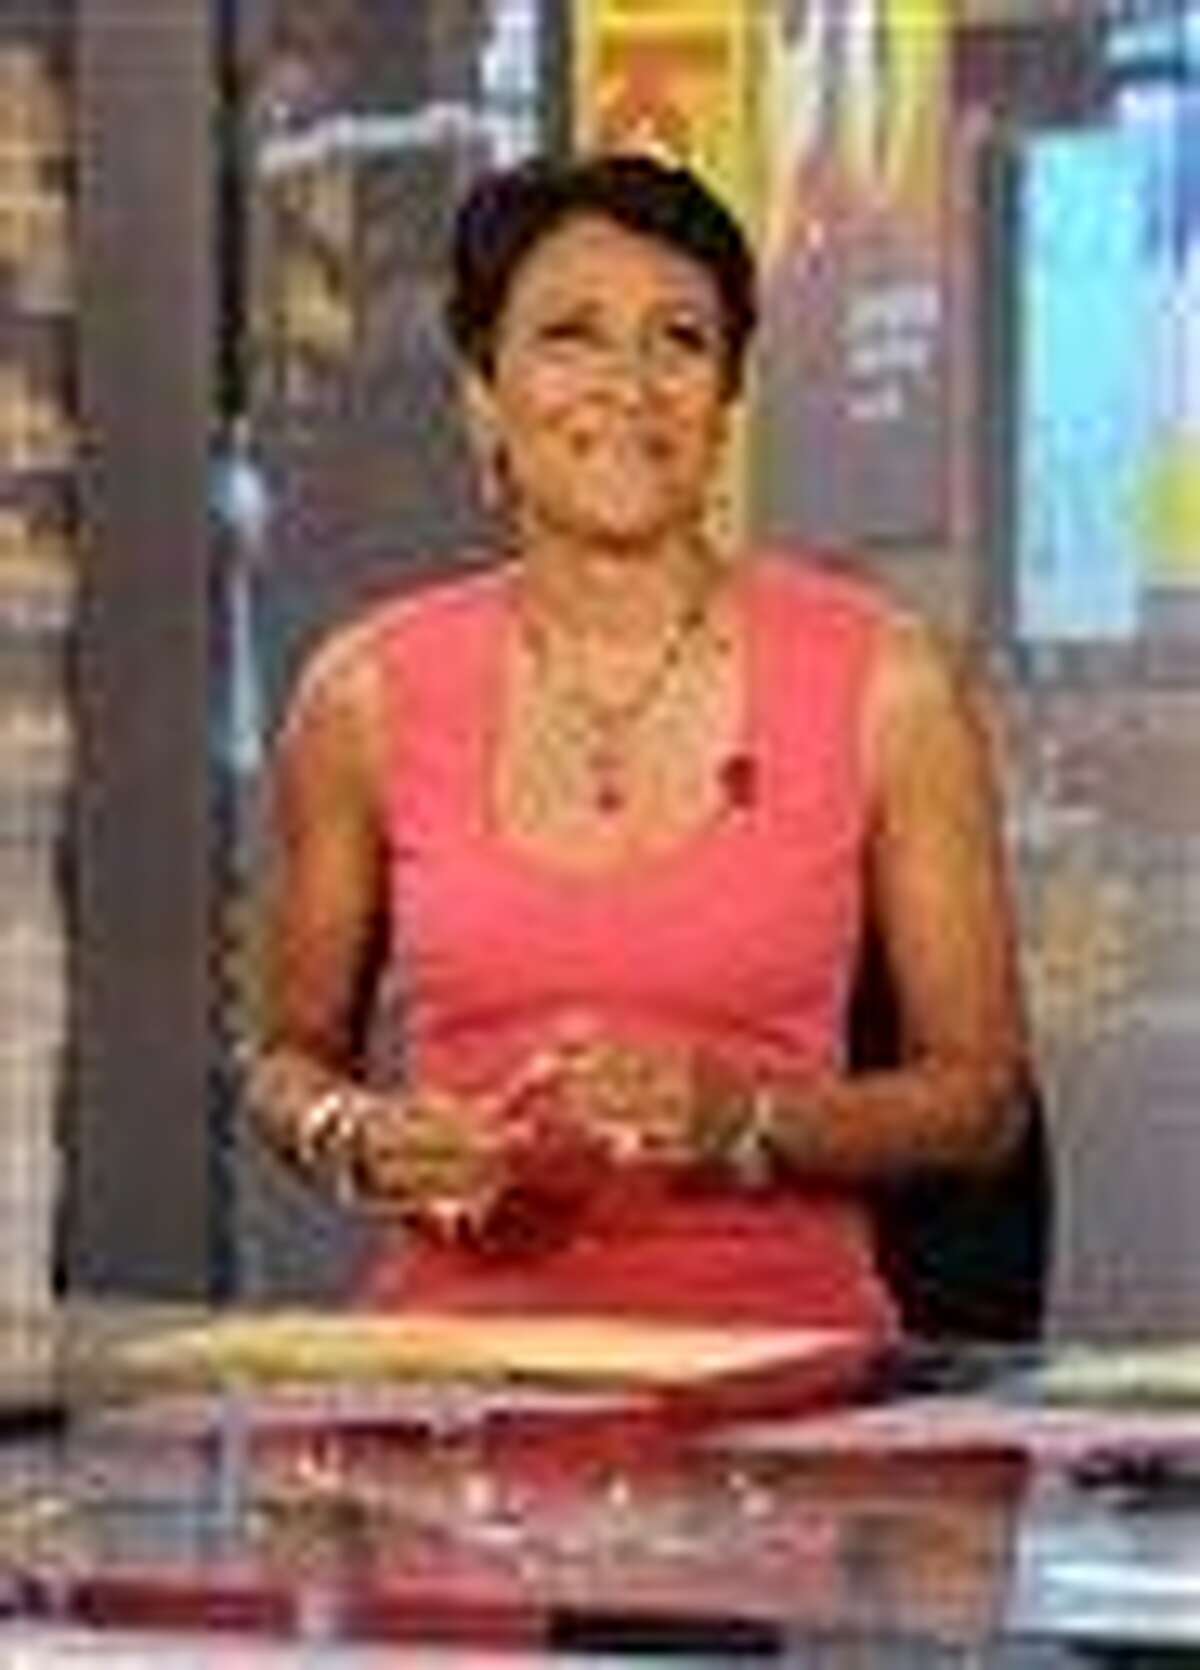 On Monday's edition of the ABC News wakeup program, Robin Roberts made official the start date for what's being called her "extended medical leave." Roberts told viewers in July that she has MDS, a blood and bone marrow disease once known as preleukemia. Associated Press photo